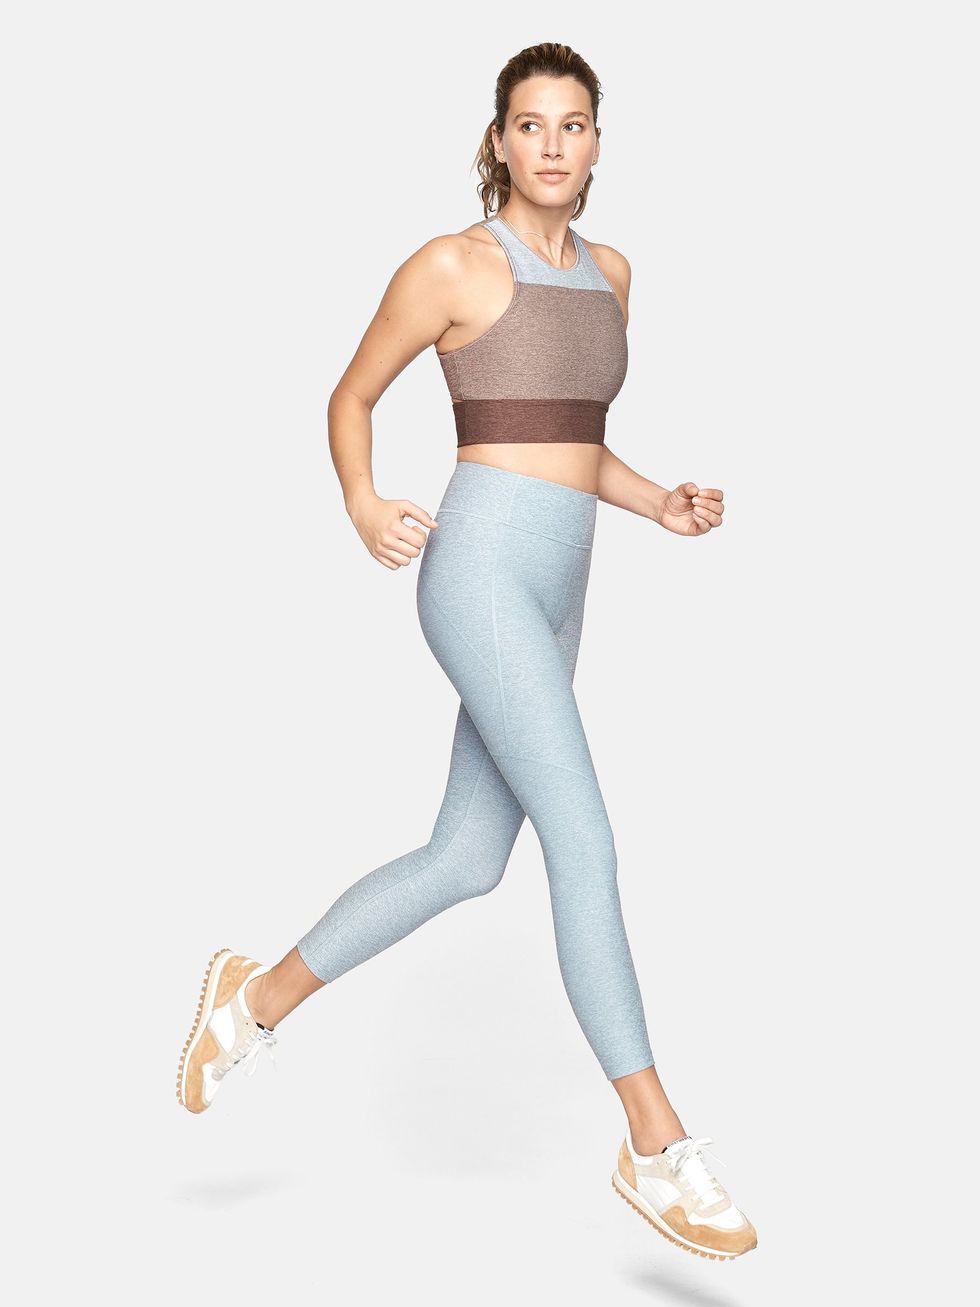 8 Reasons to Buy/Not to Buy Outdoor Voices TechSweat Full Length Leggings